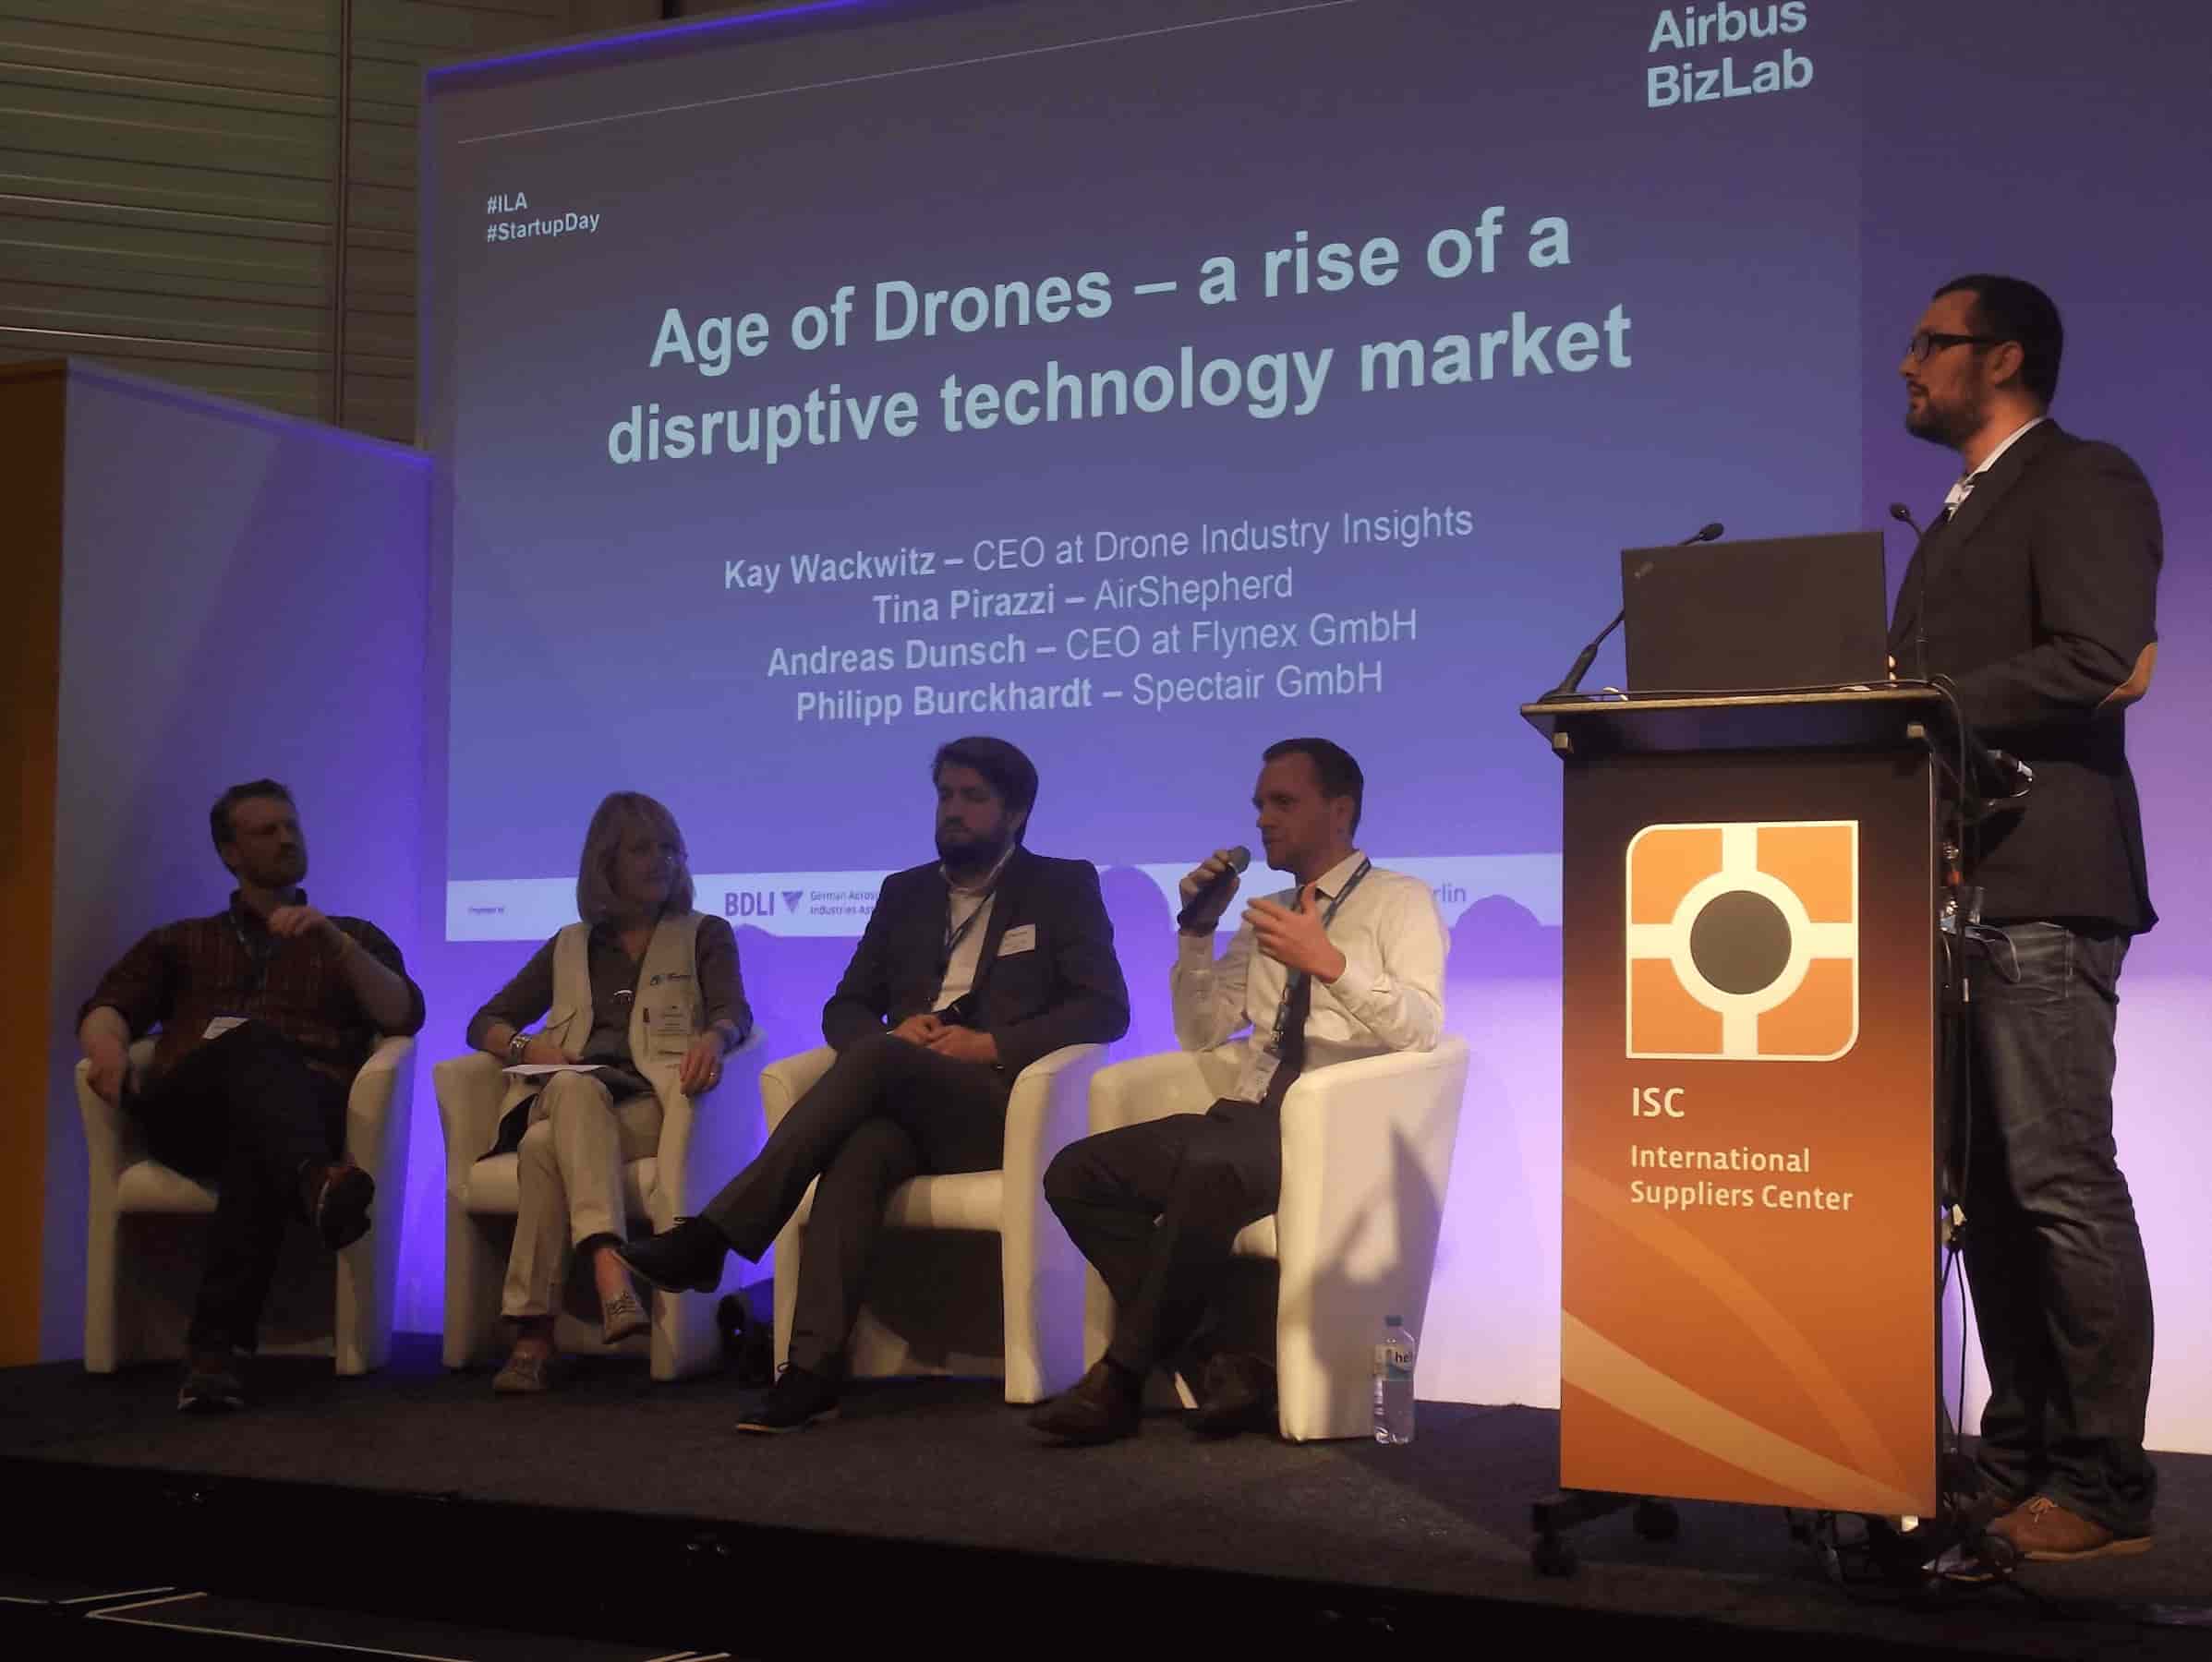 Panel Discussion - The Age o Drones